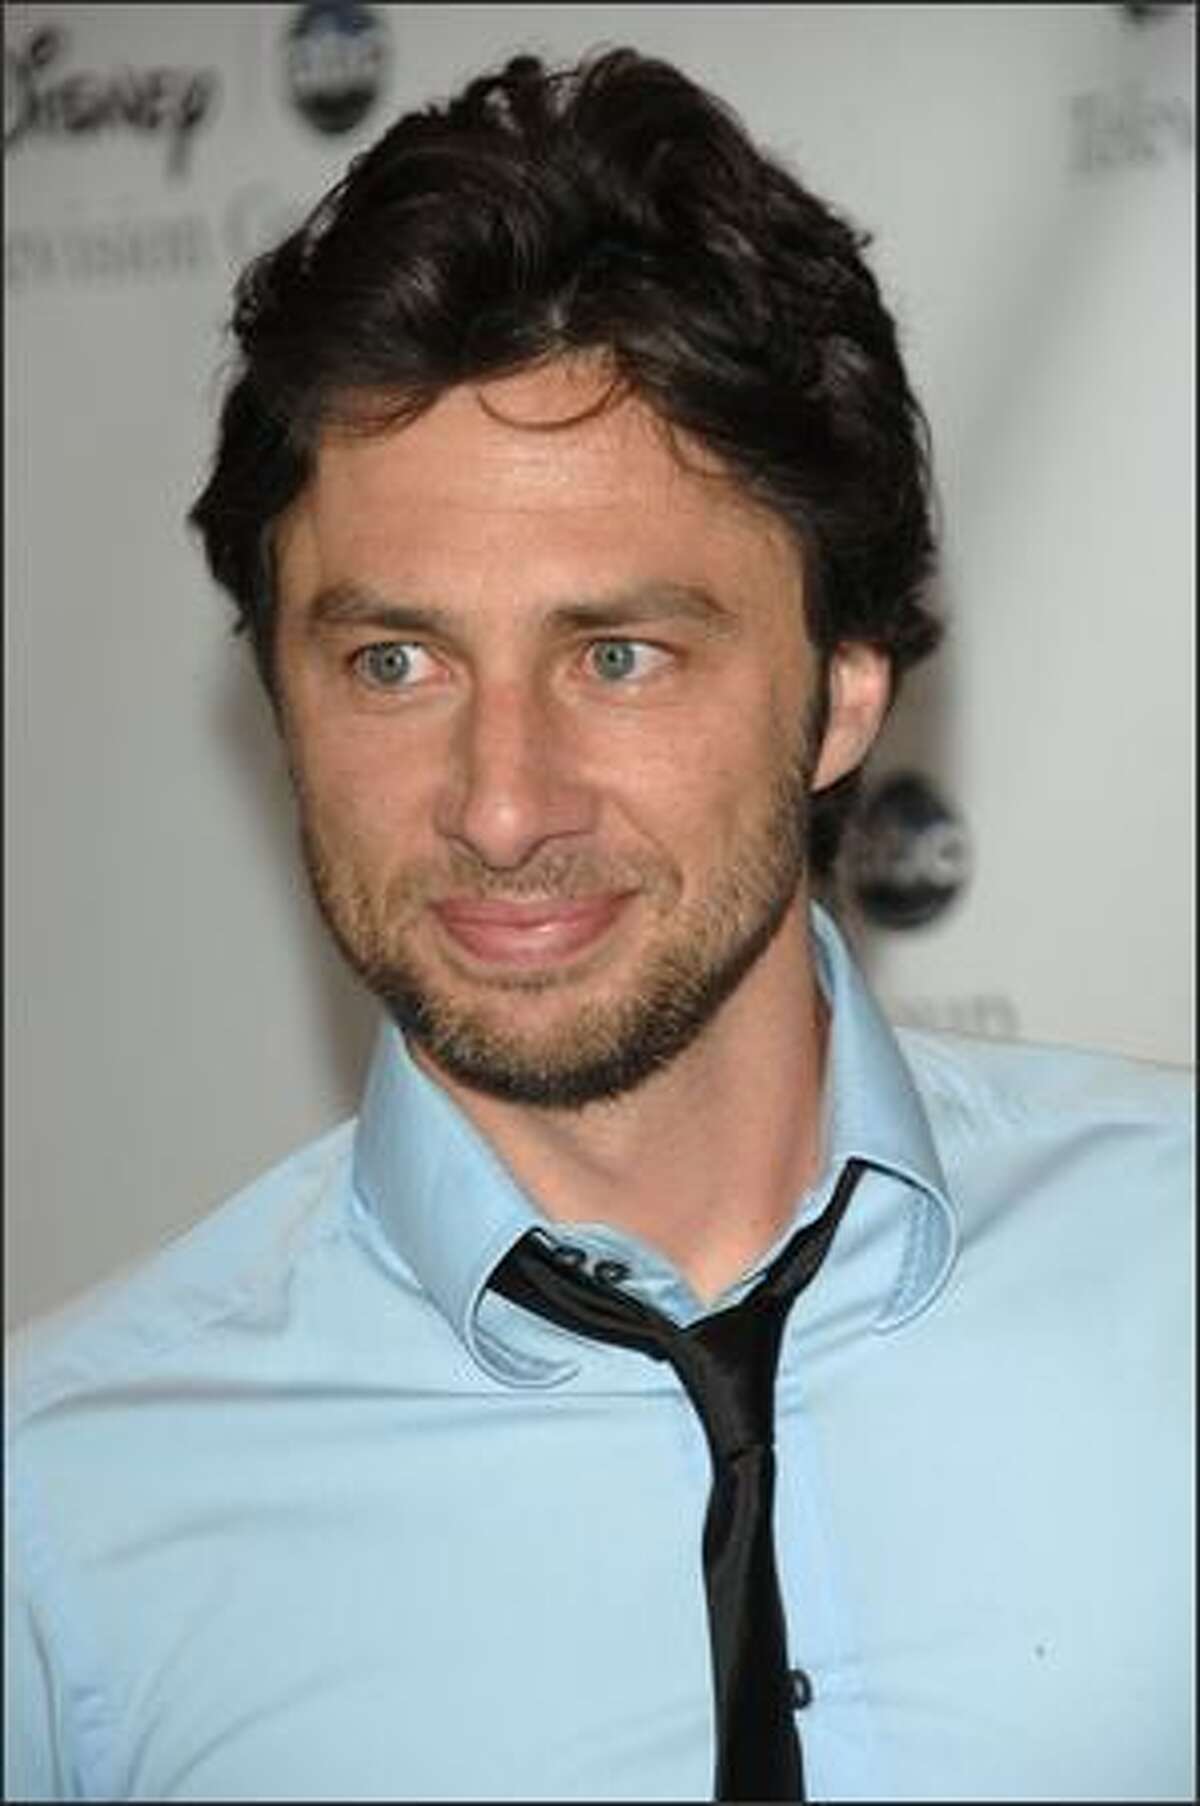 Actor Zach Braff attends Disney and ABC's "TCA - All Star Party" at the Beverly Hilton in Beverly Hills, California.